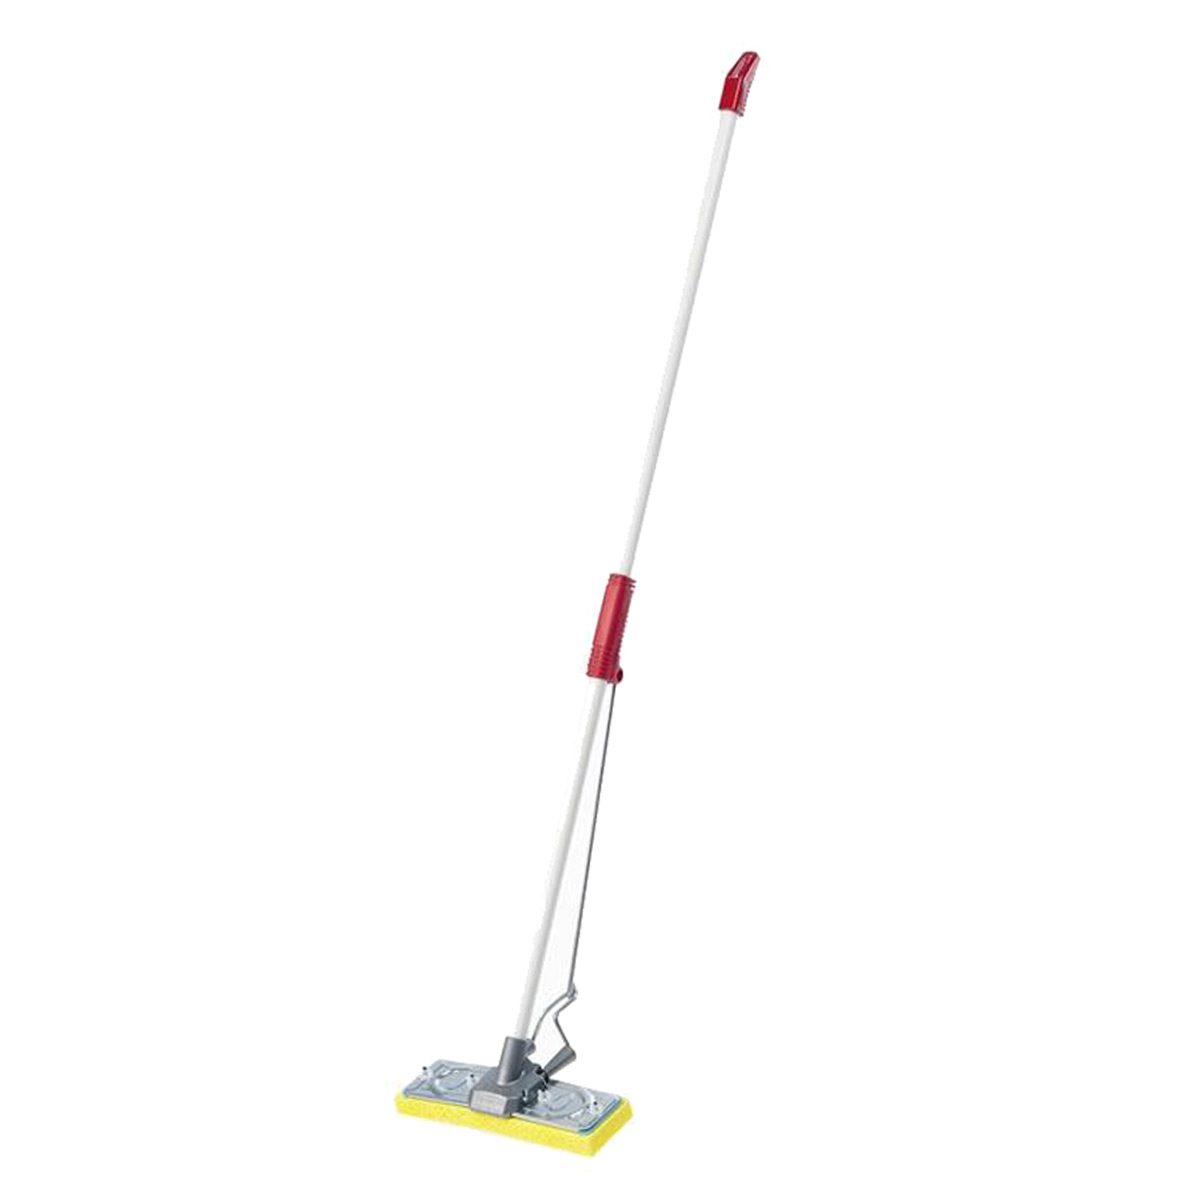 cleaning-equipment-mops-mop-a-matic-senior-4-bolt-squeeze-mop-highly-absorbent-100%-cellulose-sponge-strong-corrosion-resistant-powder-coated-steel-handle-non-slip-grips-vjs-distributors-RB2010